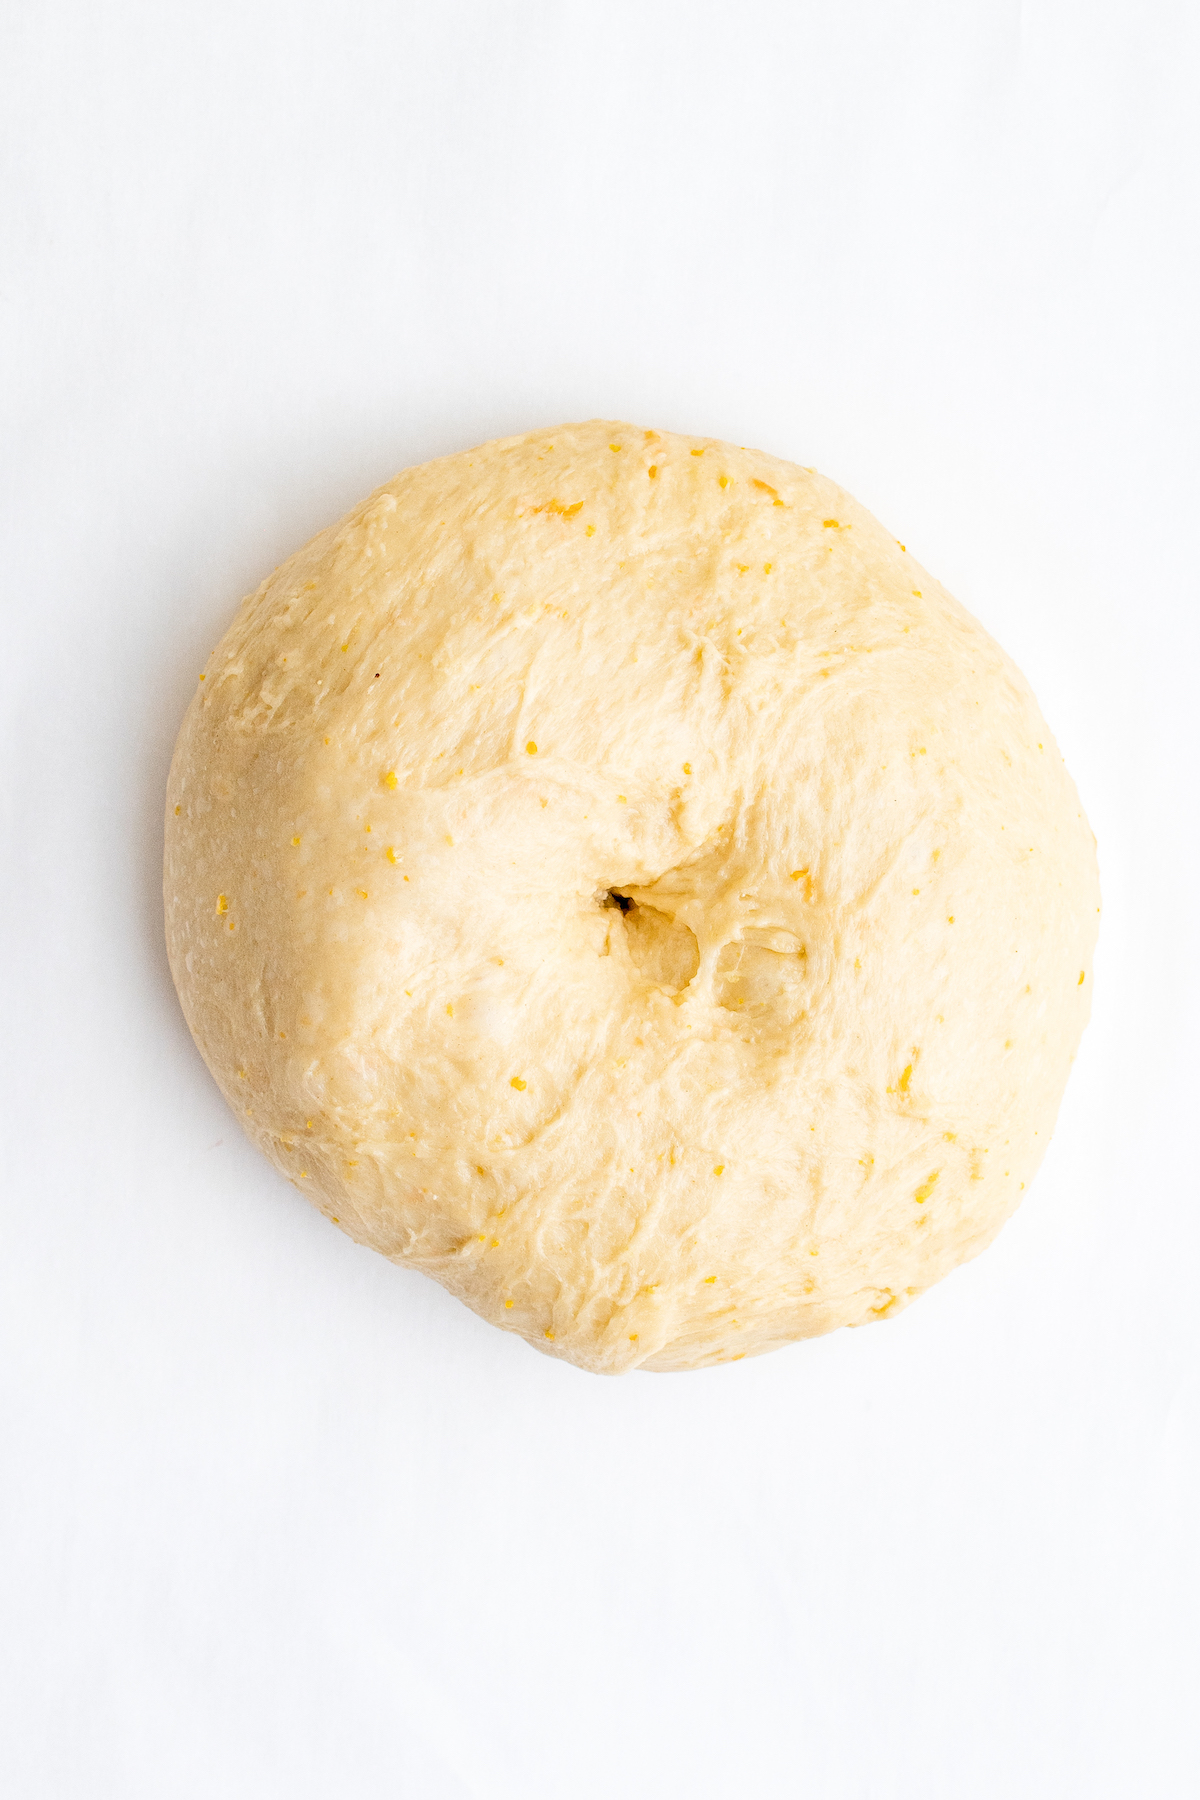 The dough with a hole poked in the center.